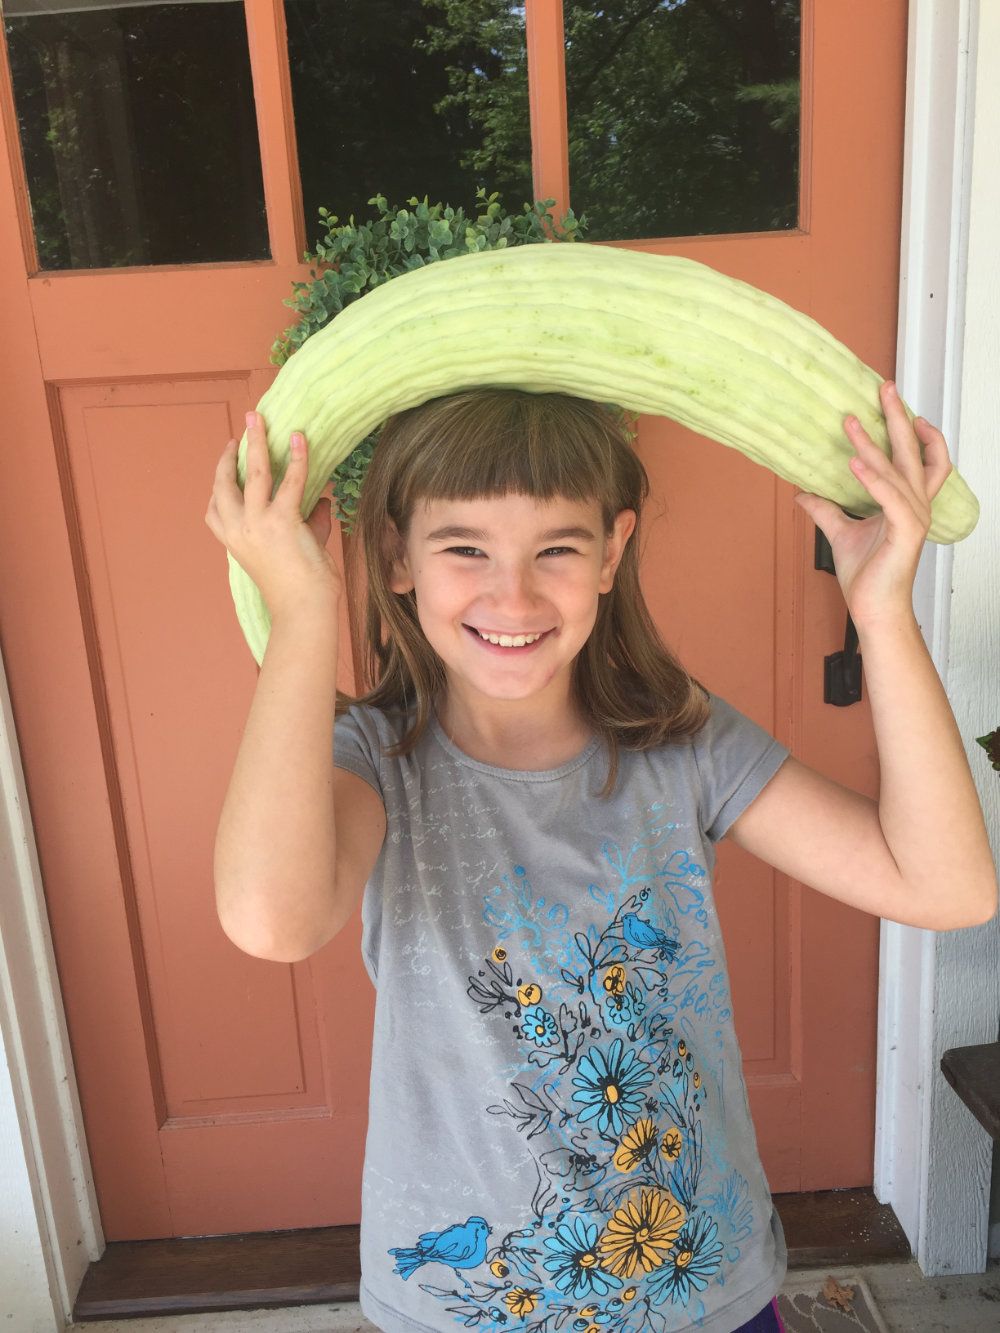 A child hold a huge home grown cucumber over their head.